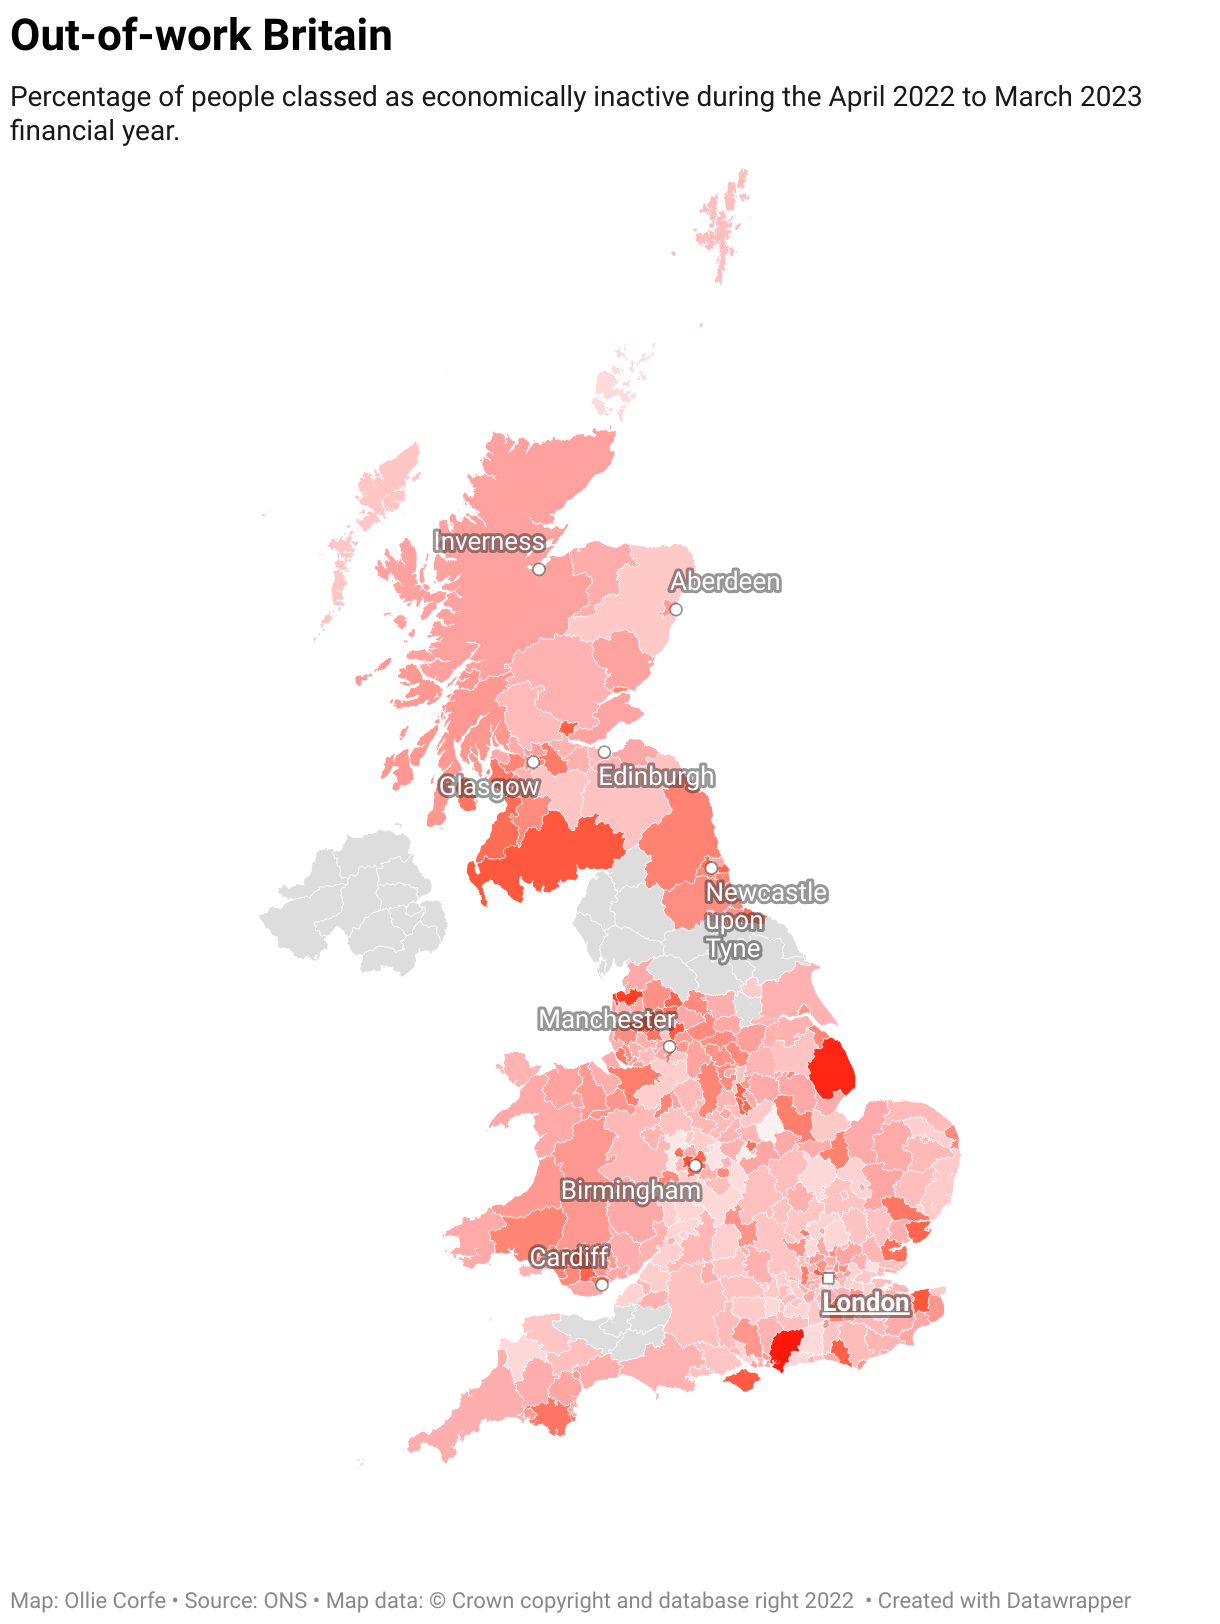 Map of economic inactivity rates across the UK.